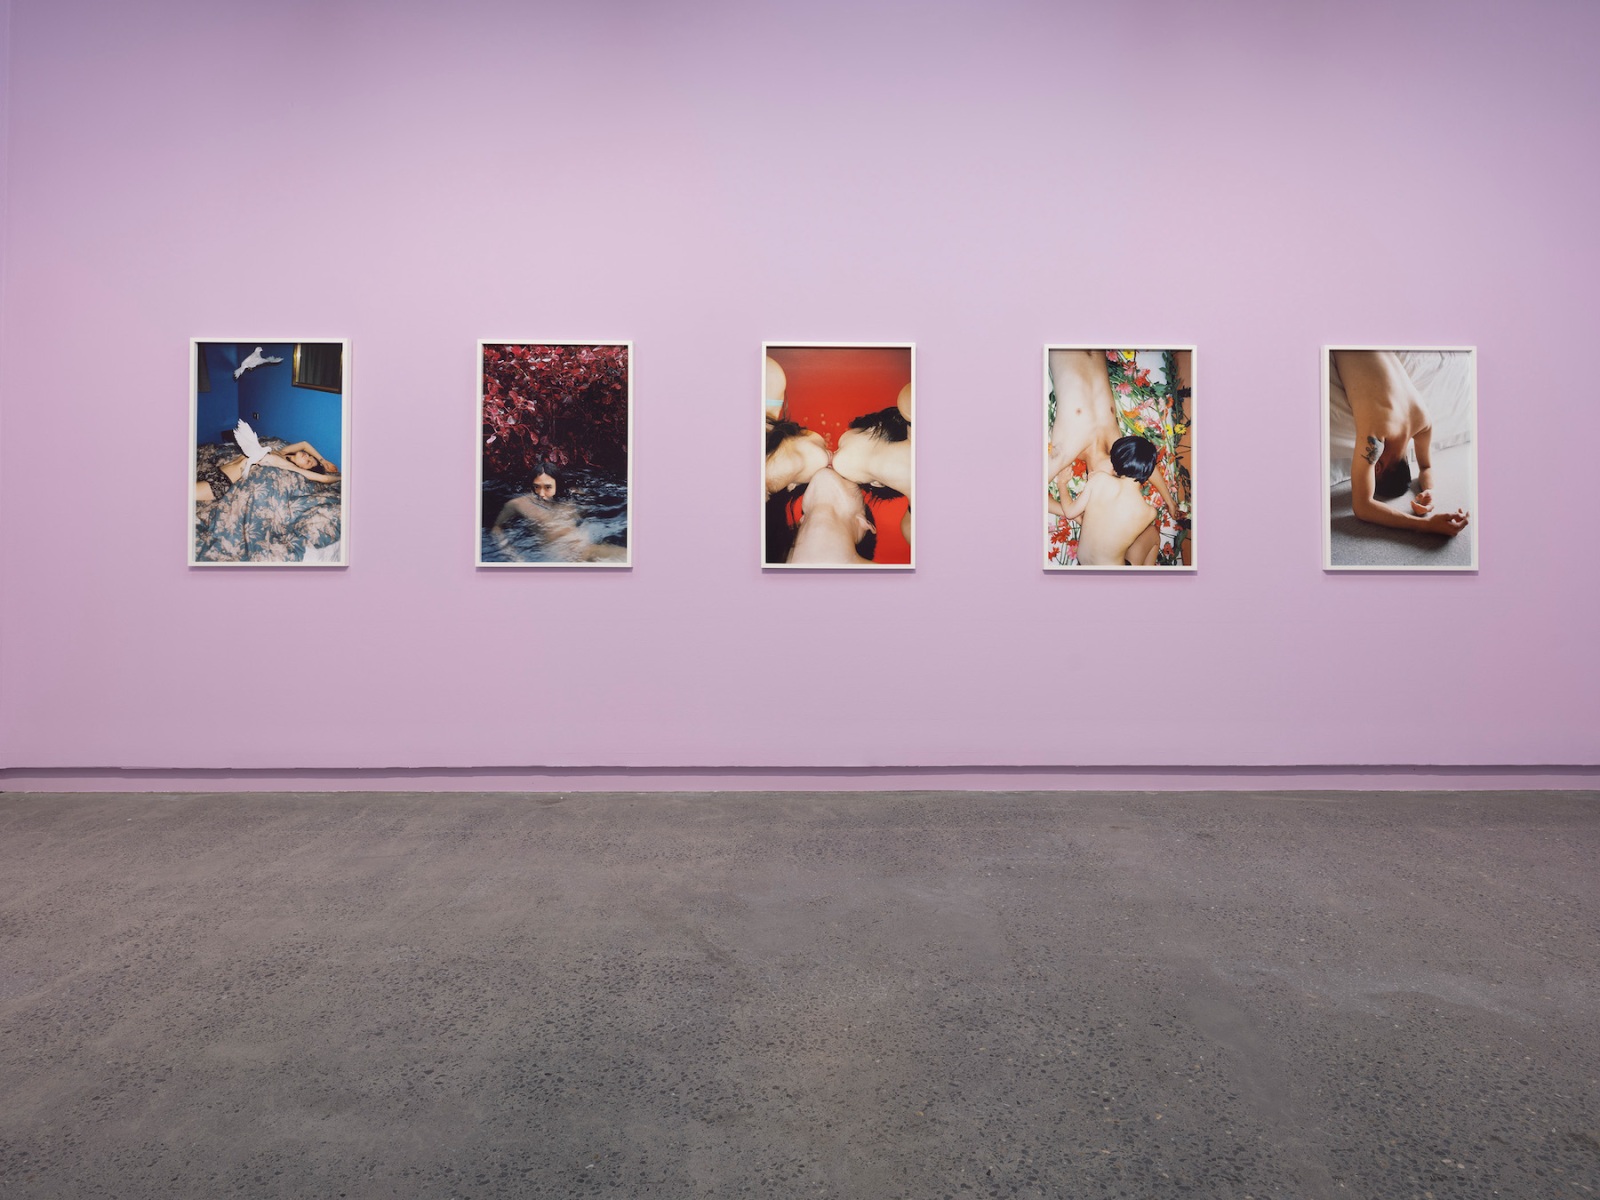 Intimate photographs of Chinese couples and individuals hang on lilac-gallery walls